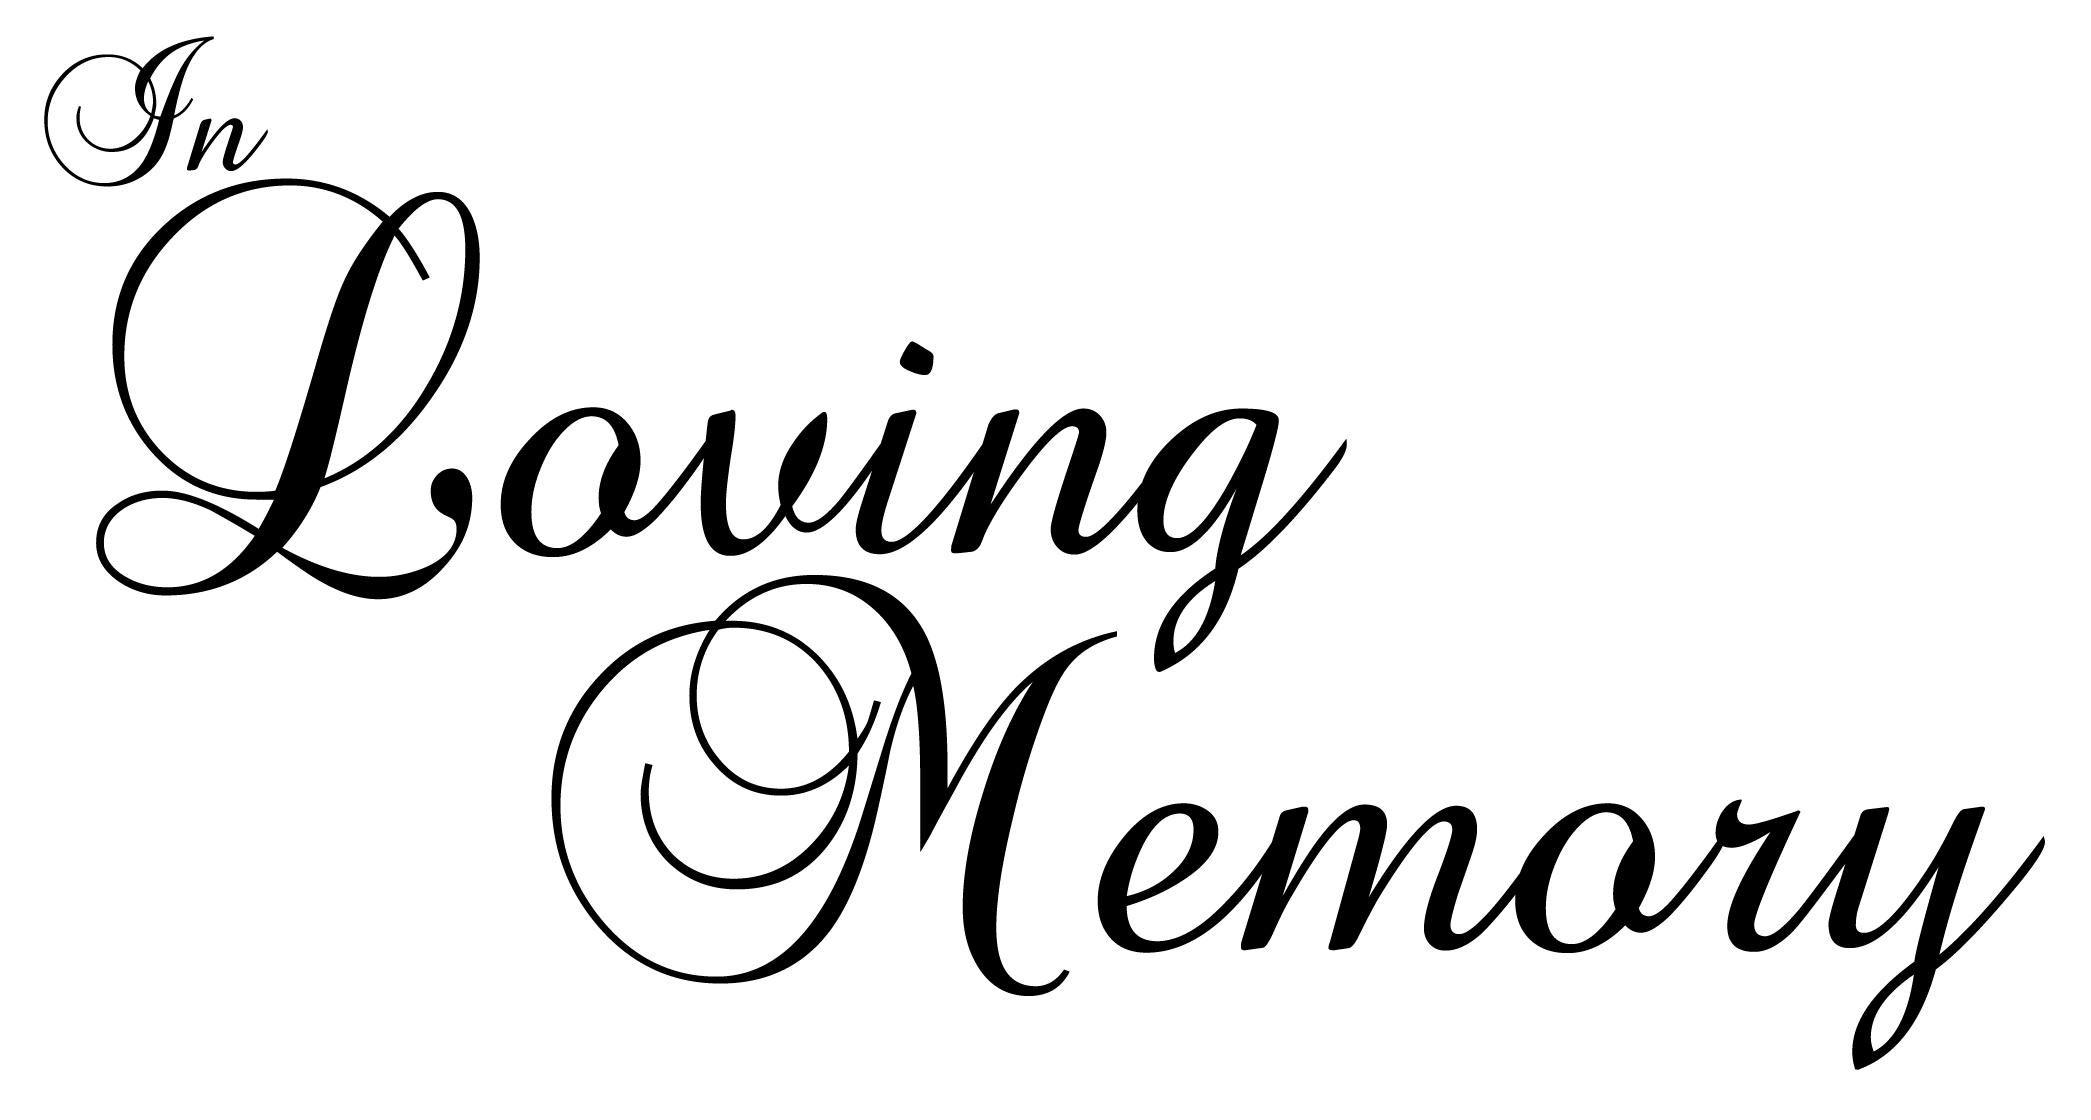 In Loving Memory Background Images Wallpaper Cave